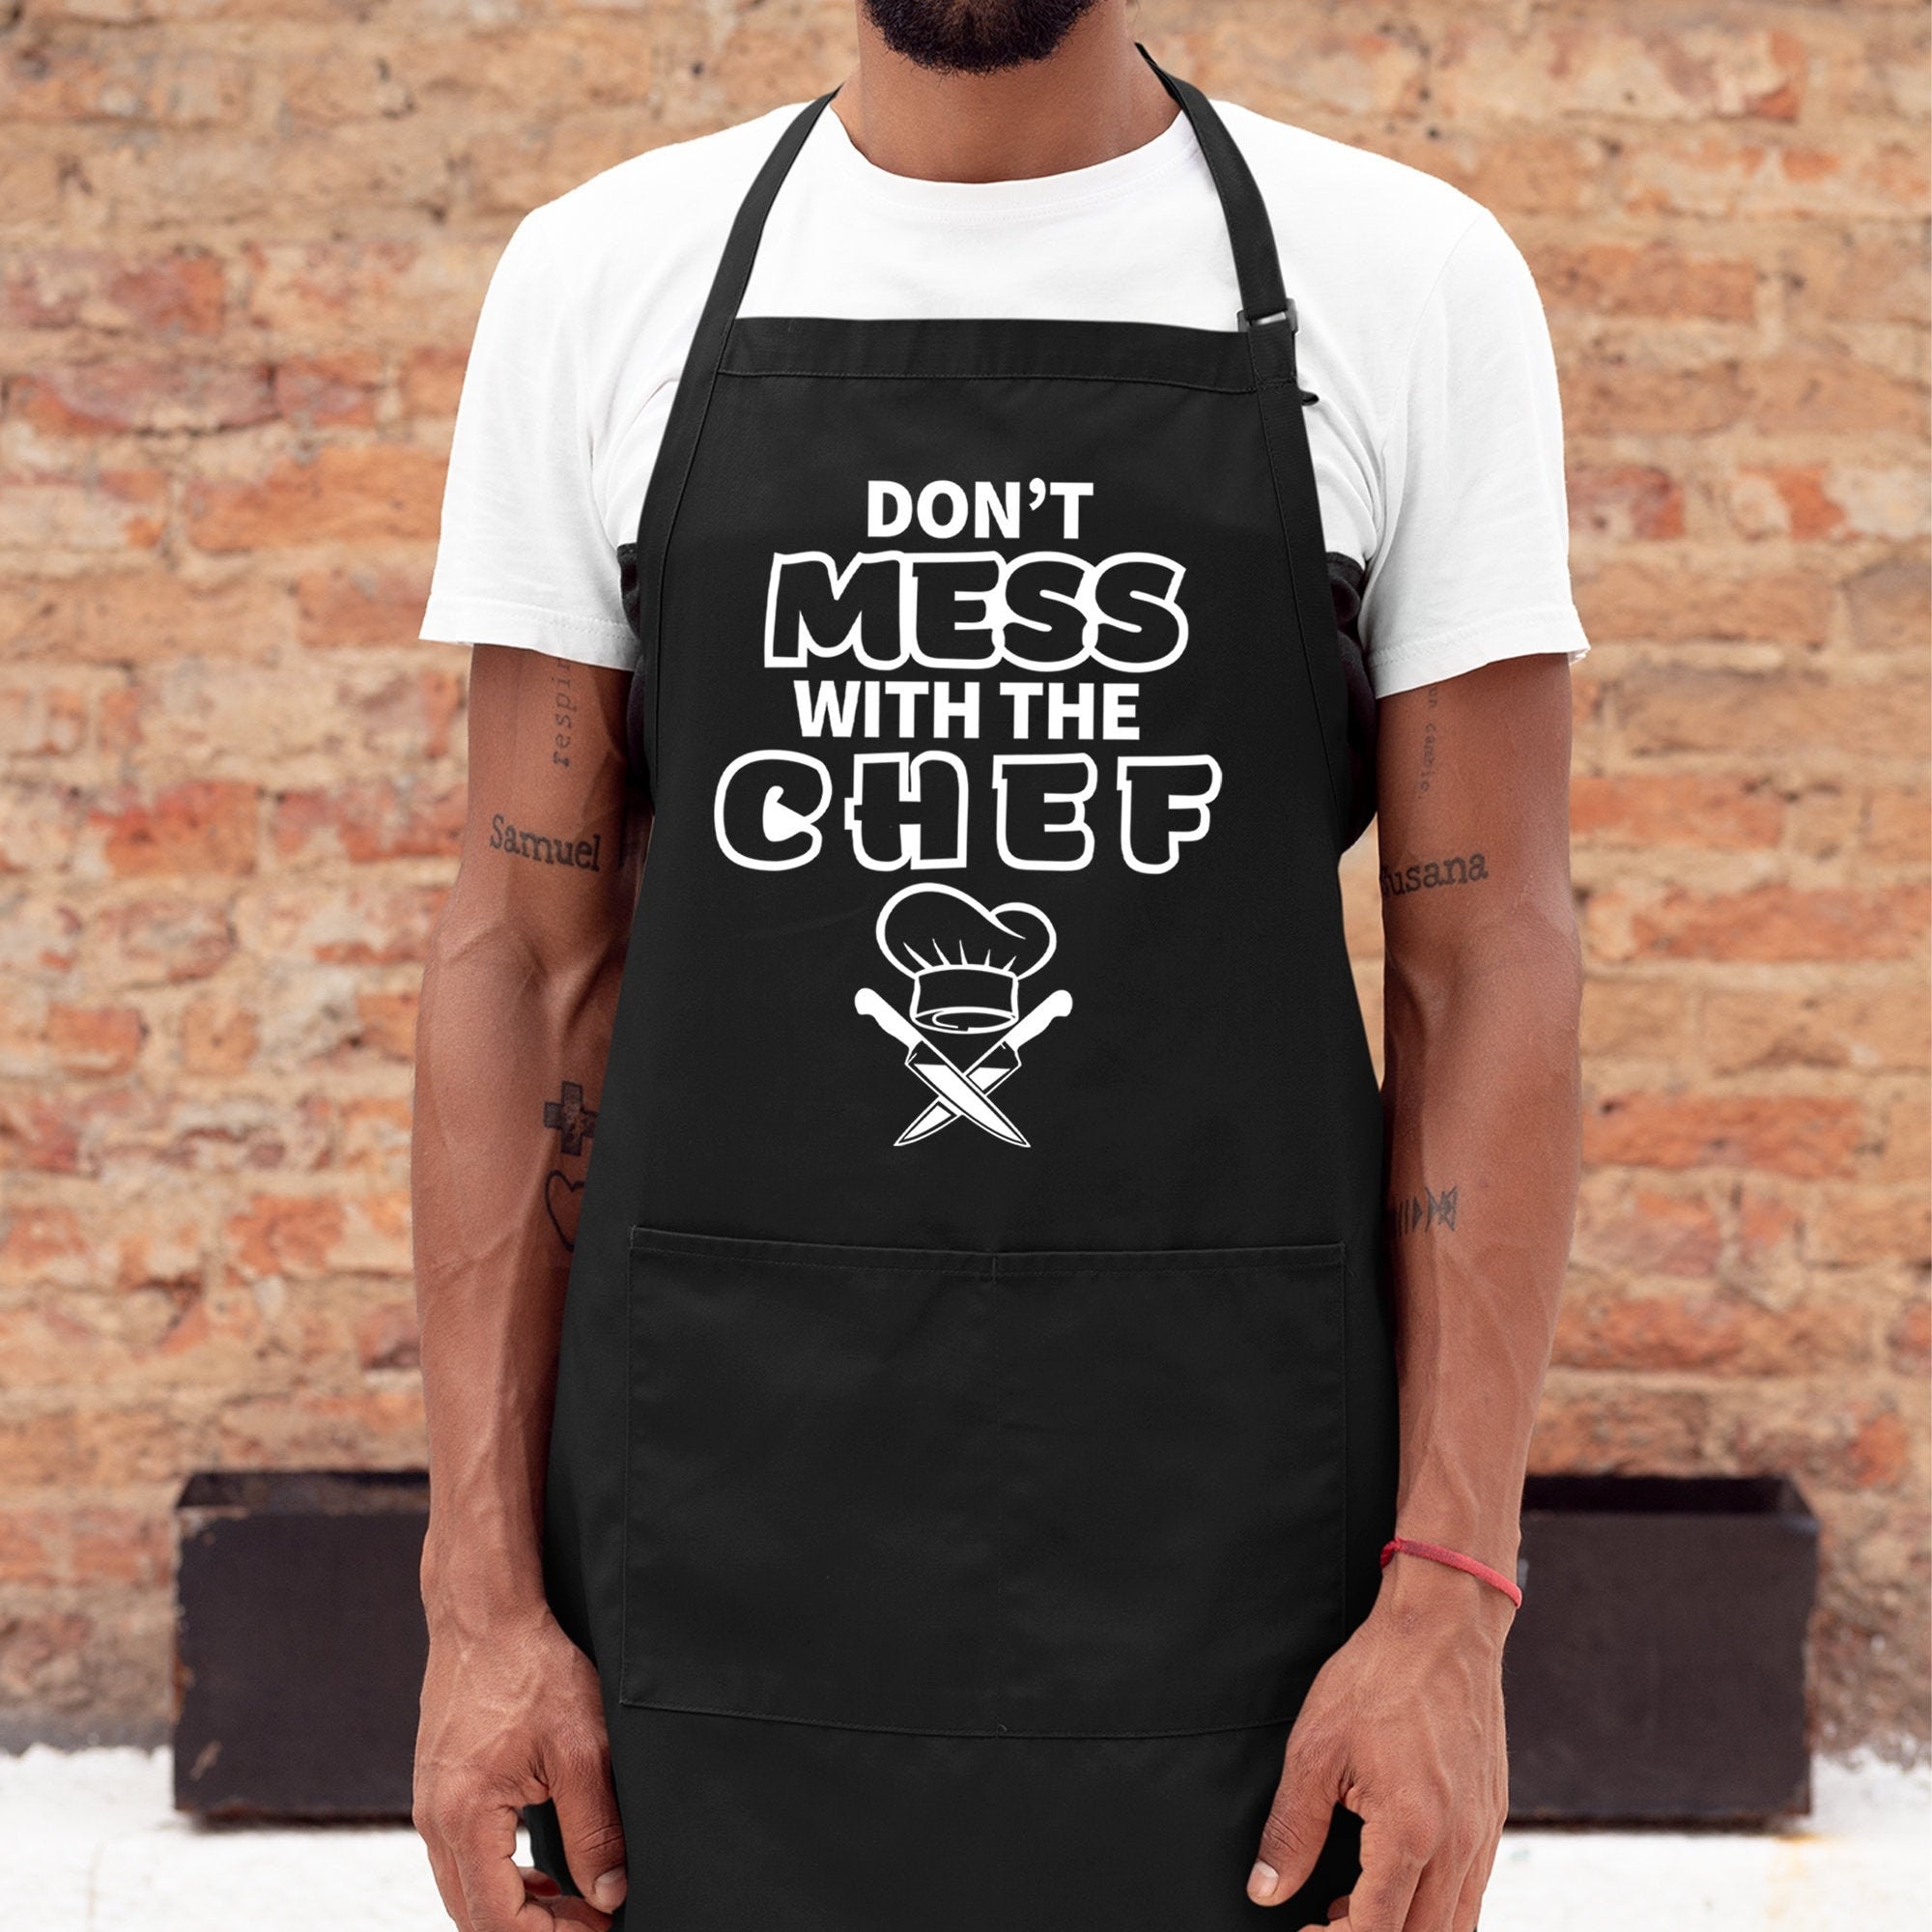 Funny Aprons for Men Women,Gifts For Men,Birthday Gifts For  Husband,Wife,Dad,Mom,Kitchen Chef Cooking BBQ 